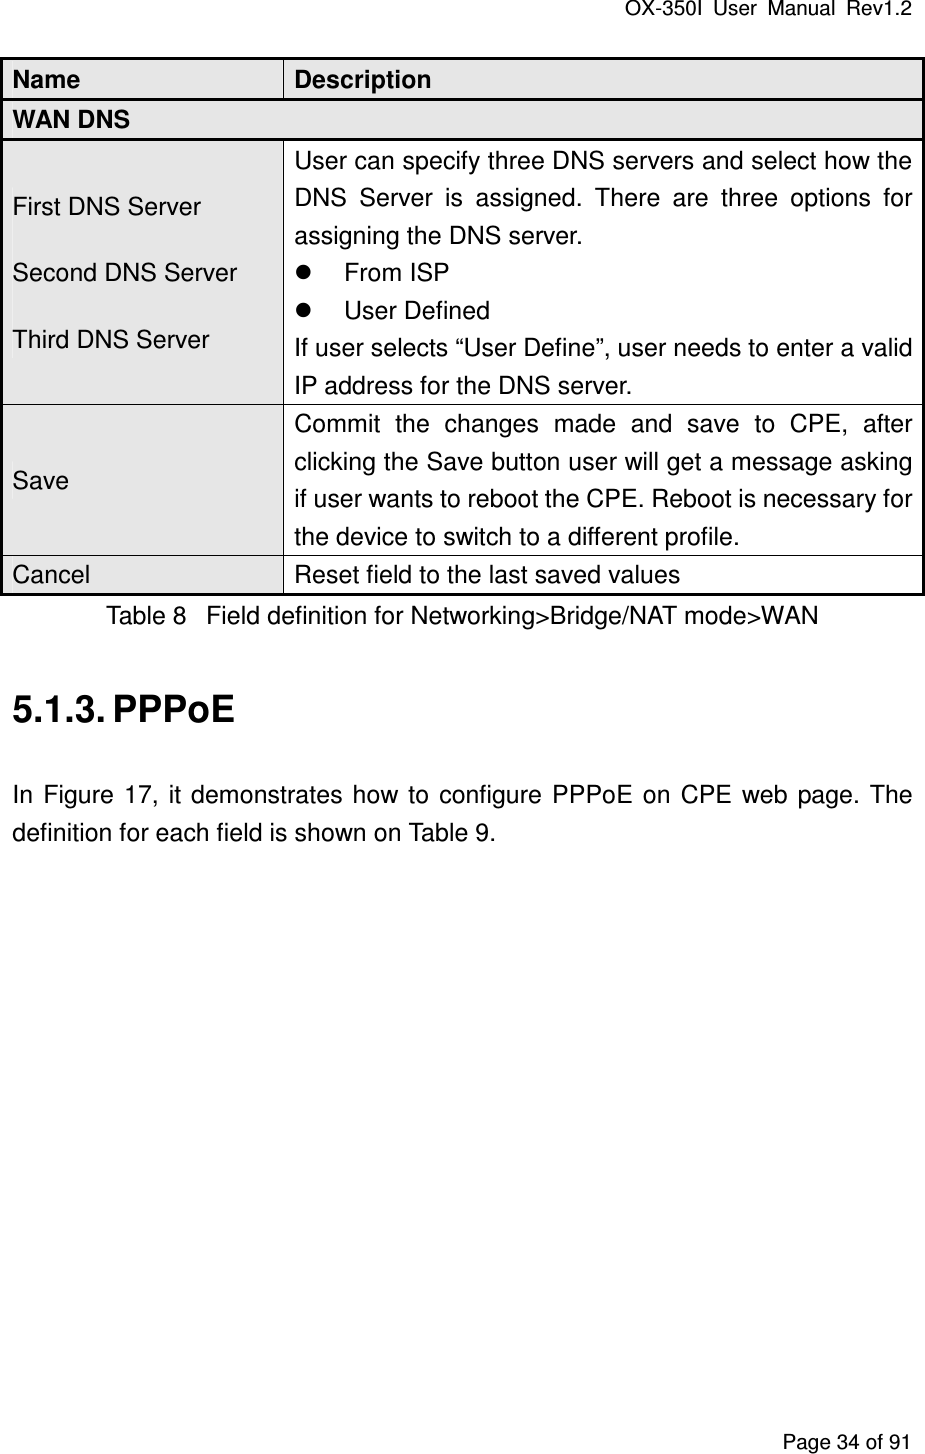 OX-350I  User  Manual  Rev1.2 Page 34 of 91 Name Description WAN DNS First DNS Server Second DNS Server Third DNS Server User can specify three DNS servers and select how the DNS  Server  is  assigned.  There  are  three  options  for assigning the DNS server.   From ISP   User Defined If user selects “User Define”, user needs to enter a valid IP address for the DNS server.   Save Commit  the  changes  made  and  save  to  CPE,  after clicking the Save button user will get a message asking if user wants to reboot the CPE. Reboot is necessary for the device to switch to a different profile. Cancel  Reset field to the last saved values Table 8  Field definition for Networking&gt;Bridge/NAT mode&gt;WAN 5.1.3. PPPoE In  Figure  17, it demonstrates  how to  configure  PPPoE on  CPE  web  page.  The definition for each field is shown on Table 9. 